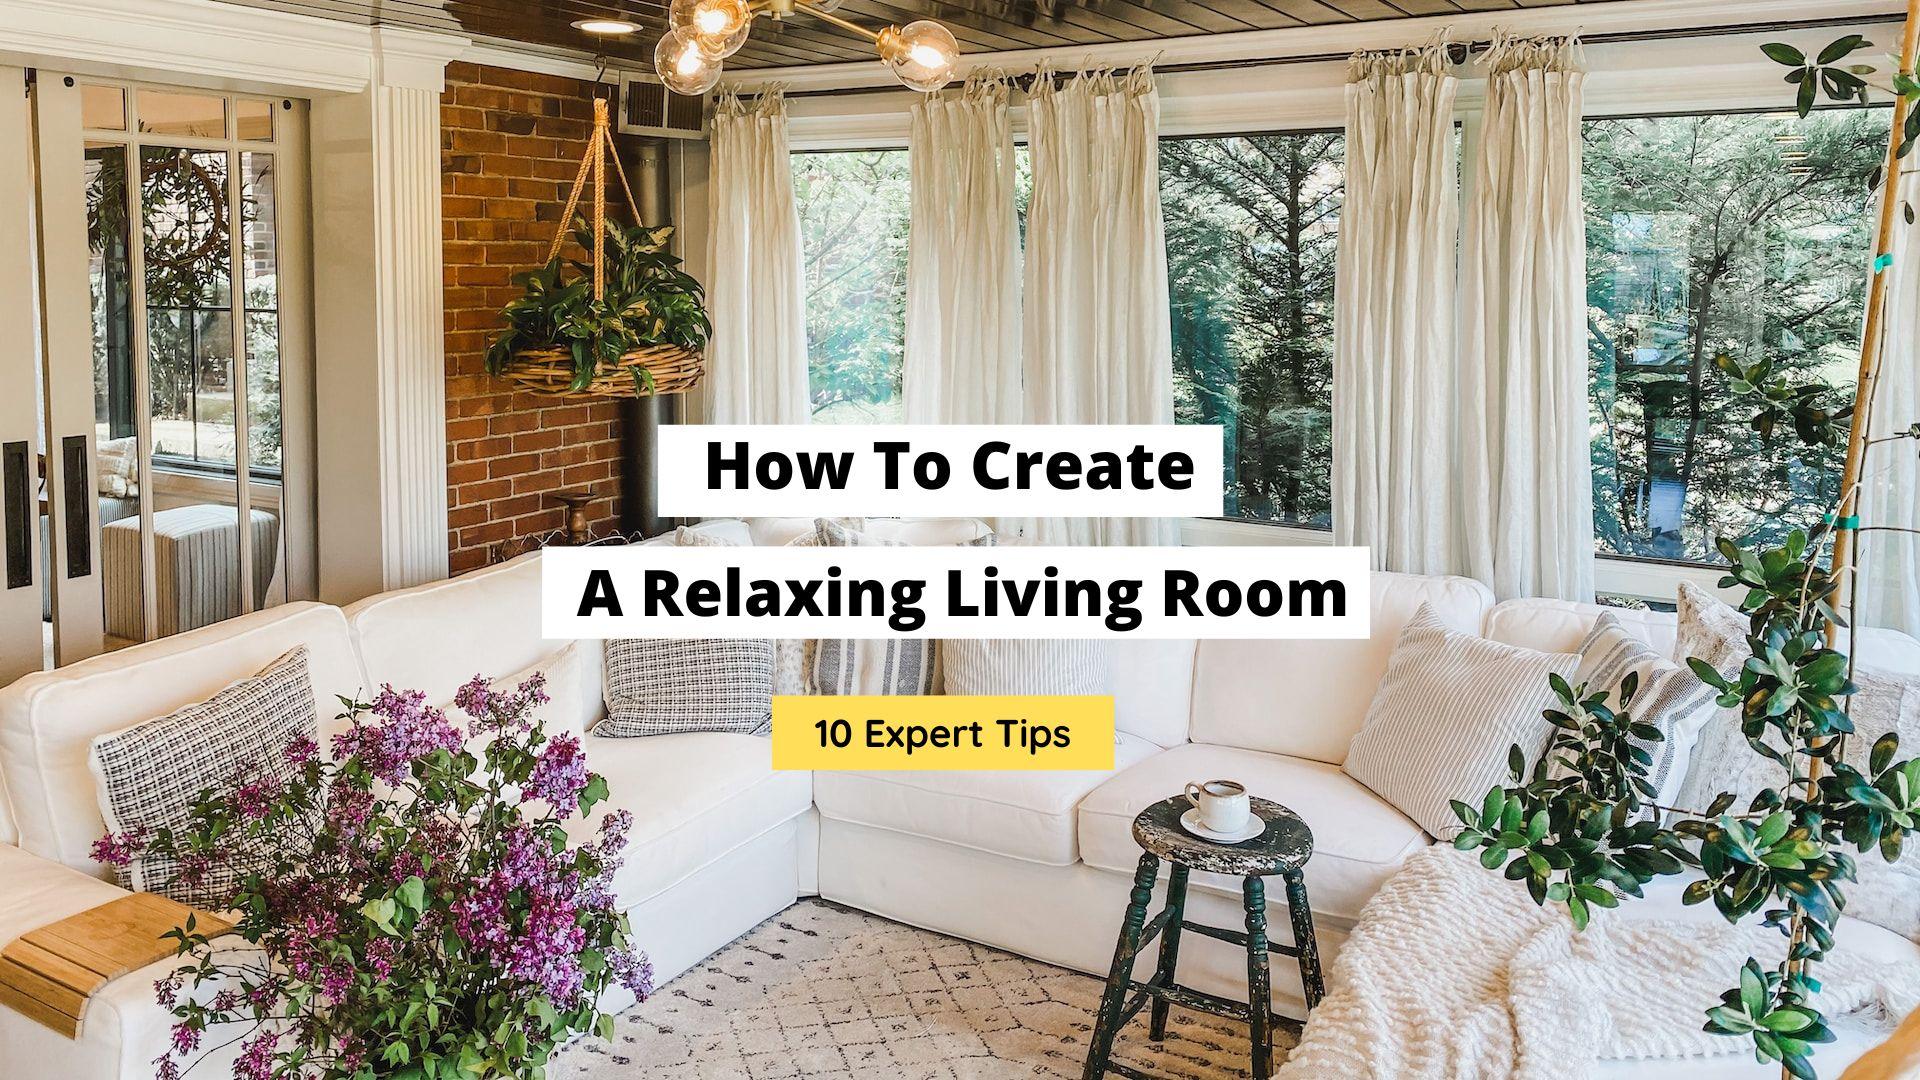 How To Create A Relaxing Living Room